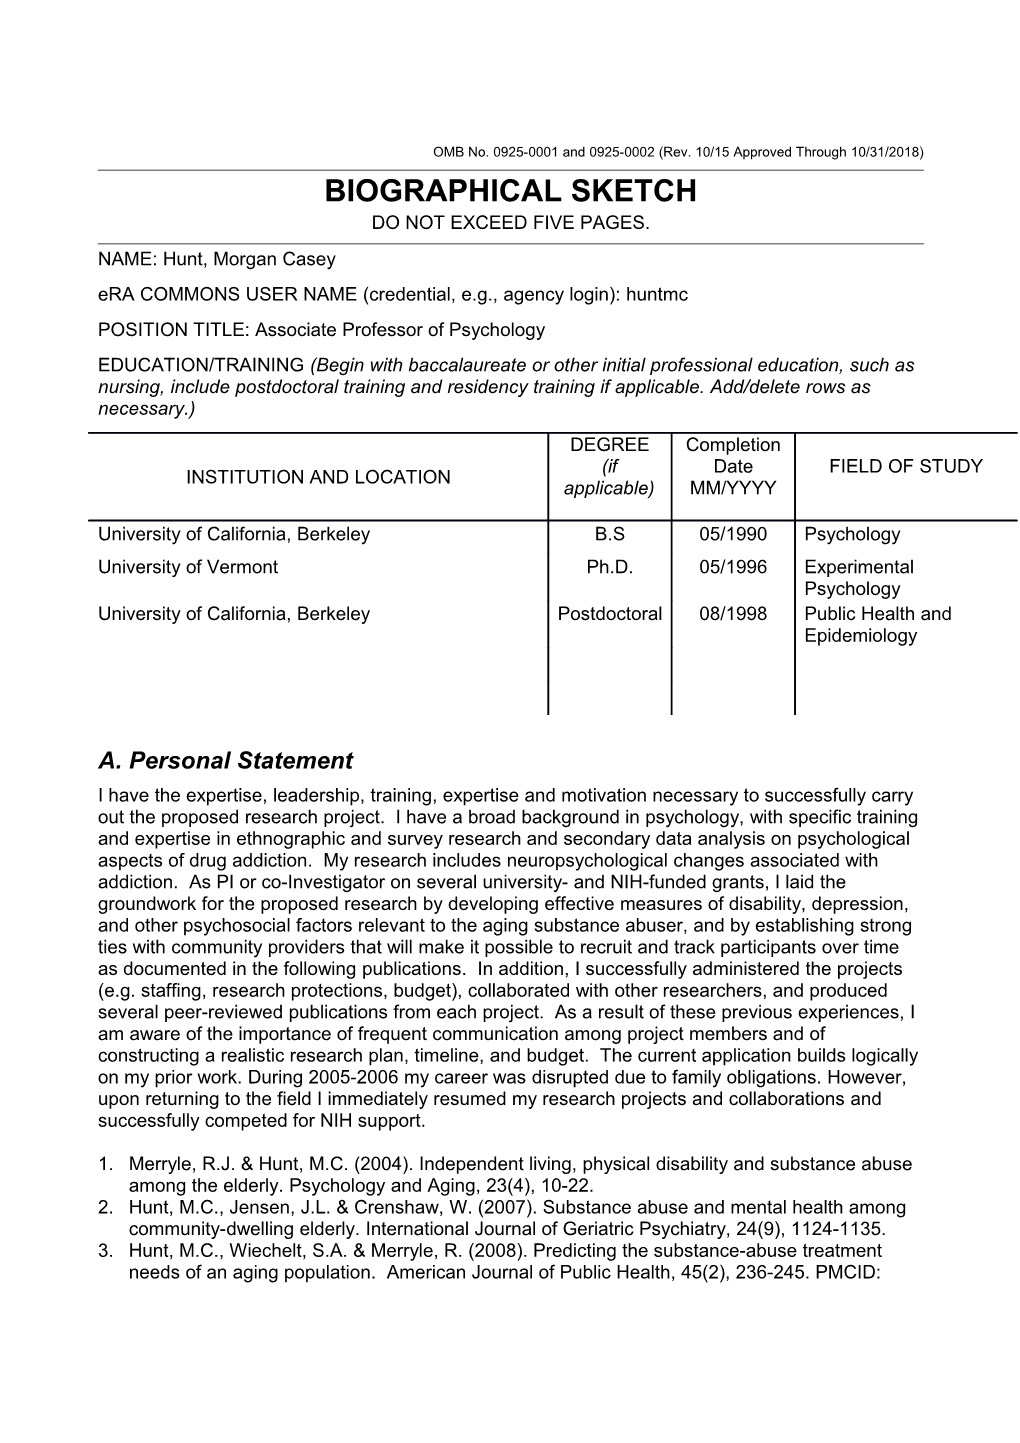 OMB No. 0925-0001/0002 (Rev. 08/12), Biographical Sketch Format Page s1